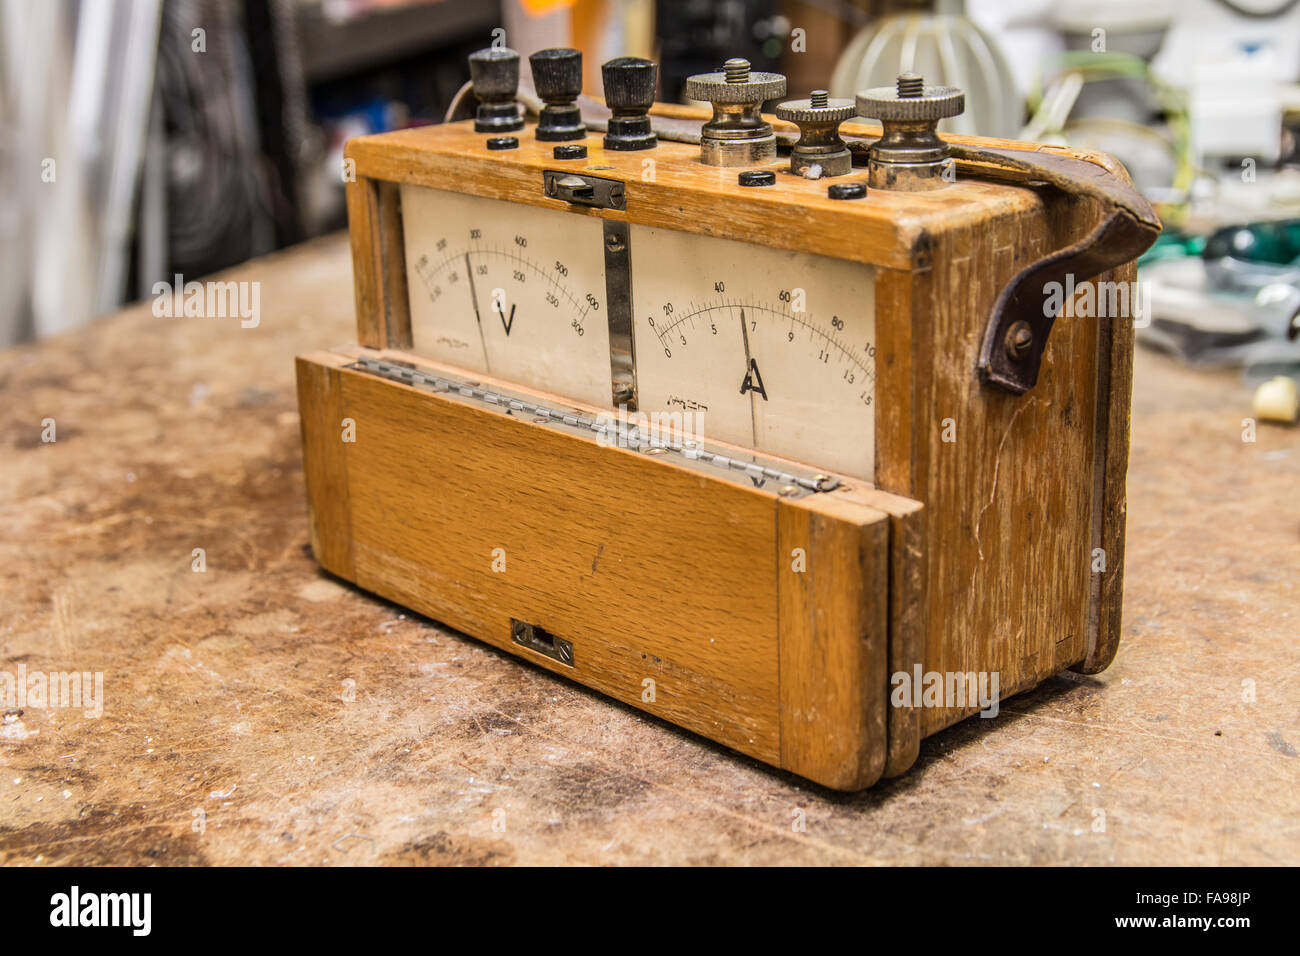 Vintage analog wooden electric meter on the old table test Stock Photo